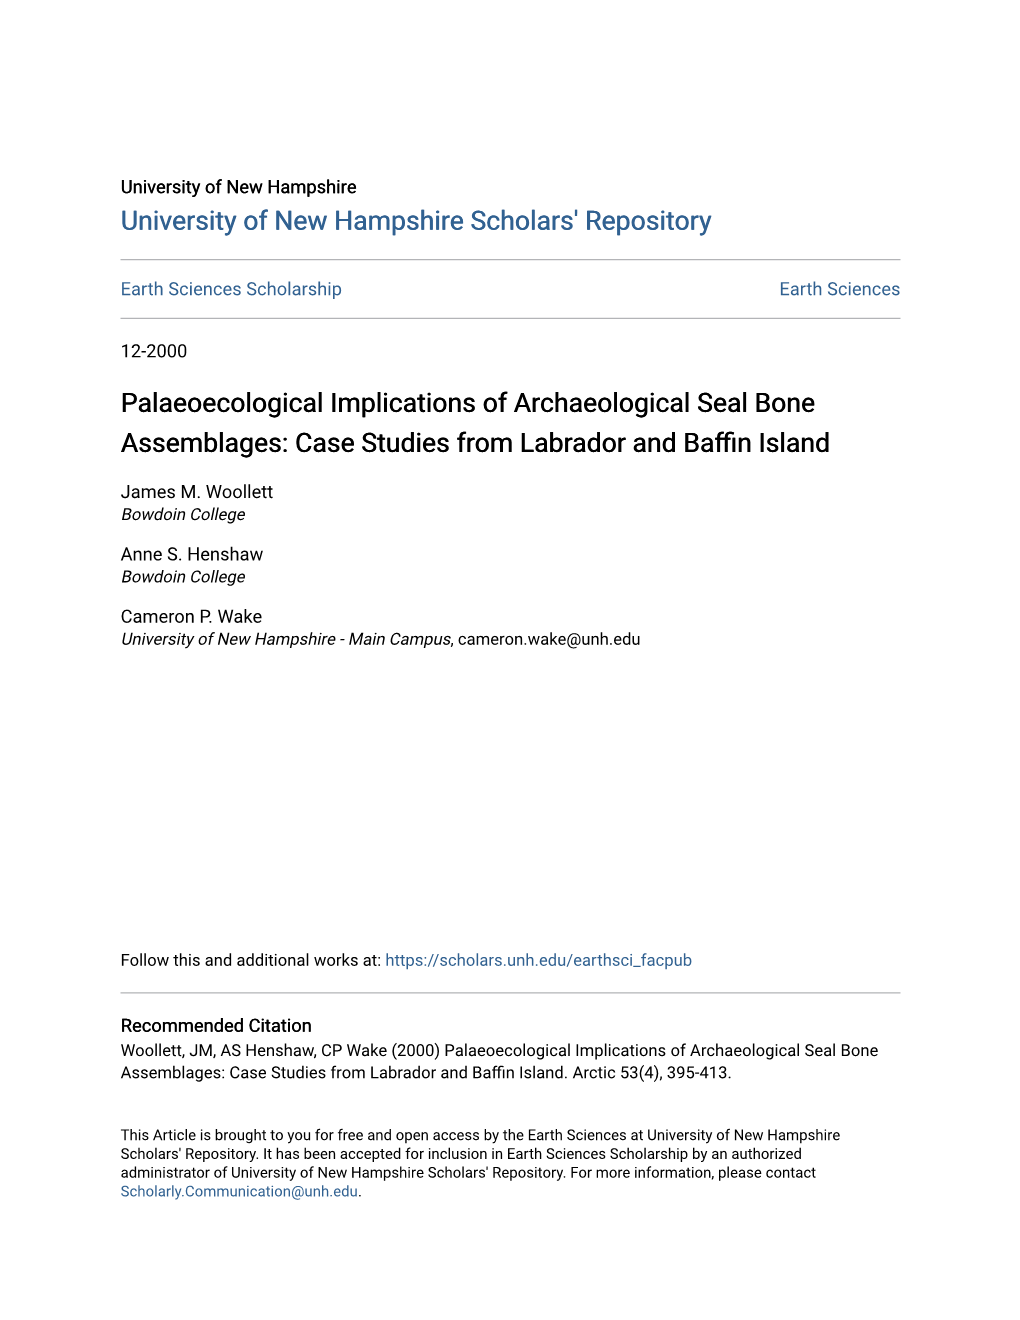 Palaeoecological Implications of Archaeological Seal Bone Assemblages: Case Studies from Labrador and Baffin Island